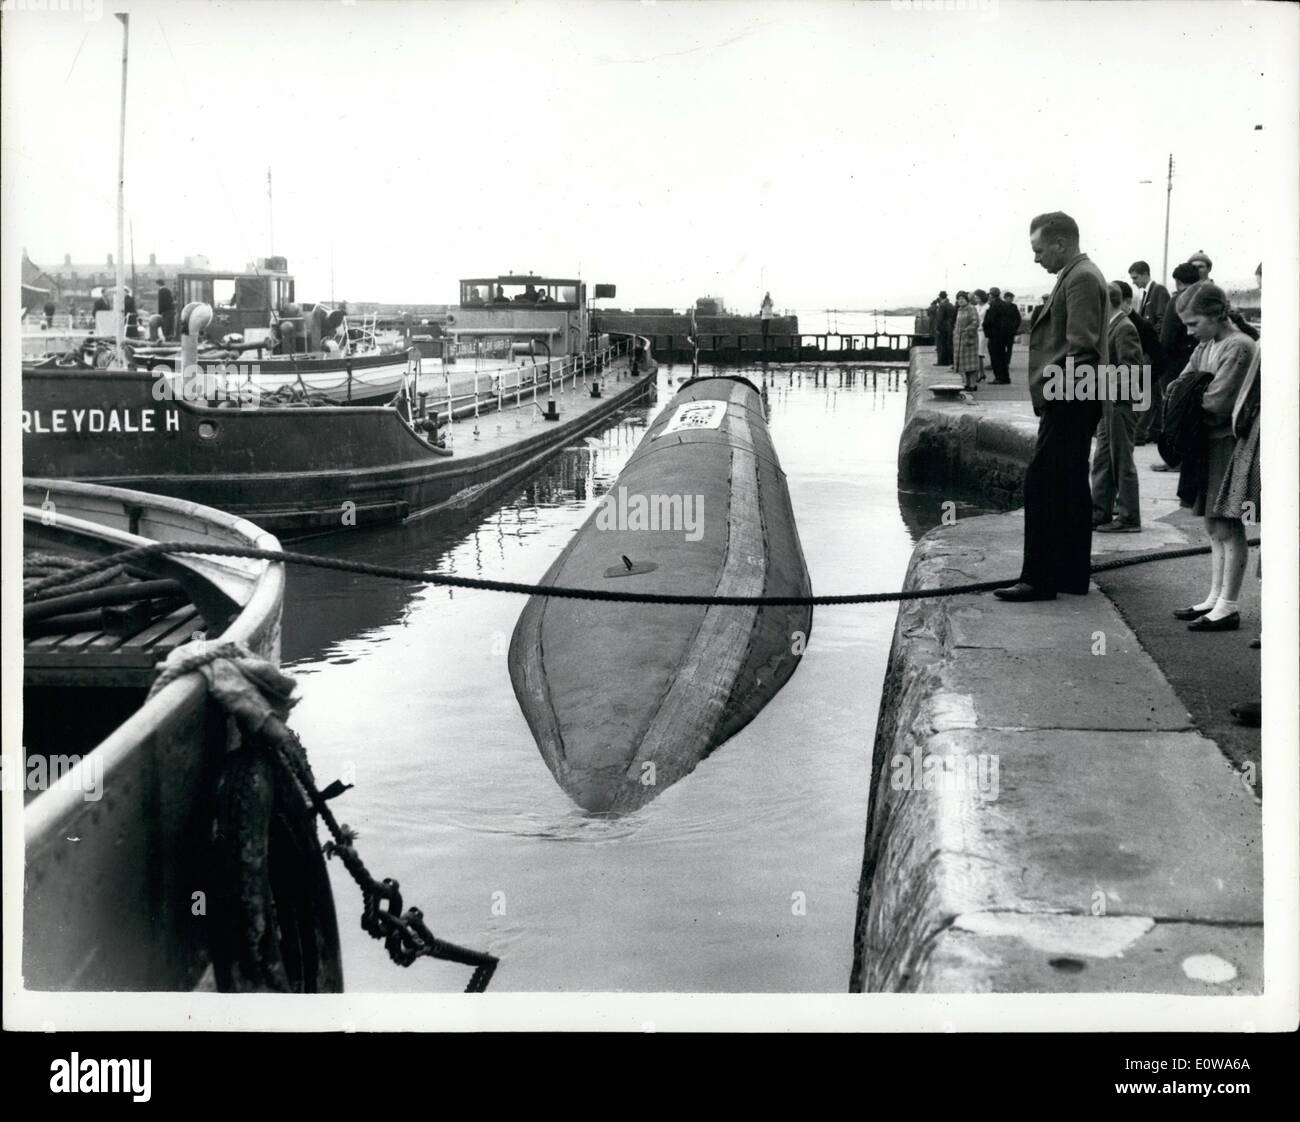 Apr. 04, 1962 - a Dracone carrying 26,000 Gallons of fuel makes experimental trip on Inland water.: Towed by a single British waterways tug, a floating Dracone, 150 feet long, sausage like container made of nylon and carrying 26,000 gallons of diesel oil, made an experimental trip from Avonmouth docks to Gloucester, passing through the look at Sharpness. yhe object of the trial is to demonstrate, among other things, that Dracones can be operated in confined waterways, Dracones 9the name comes from the ancient Greek word ''serpent'') have been used on open water and rivers aboard Stock Photo